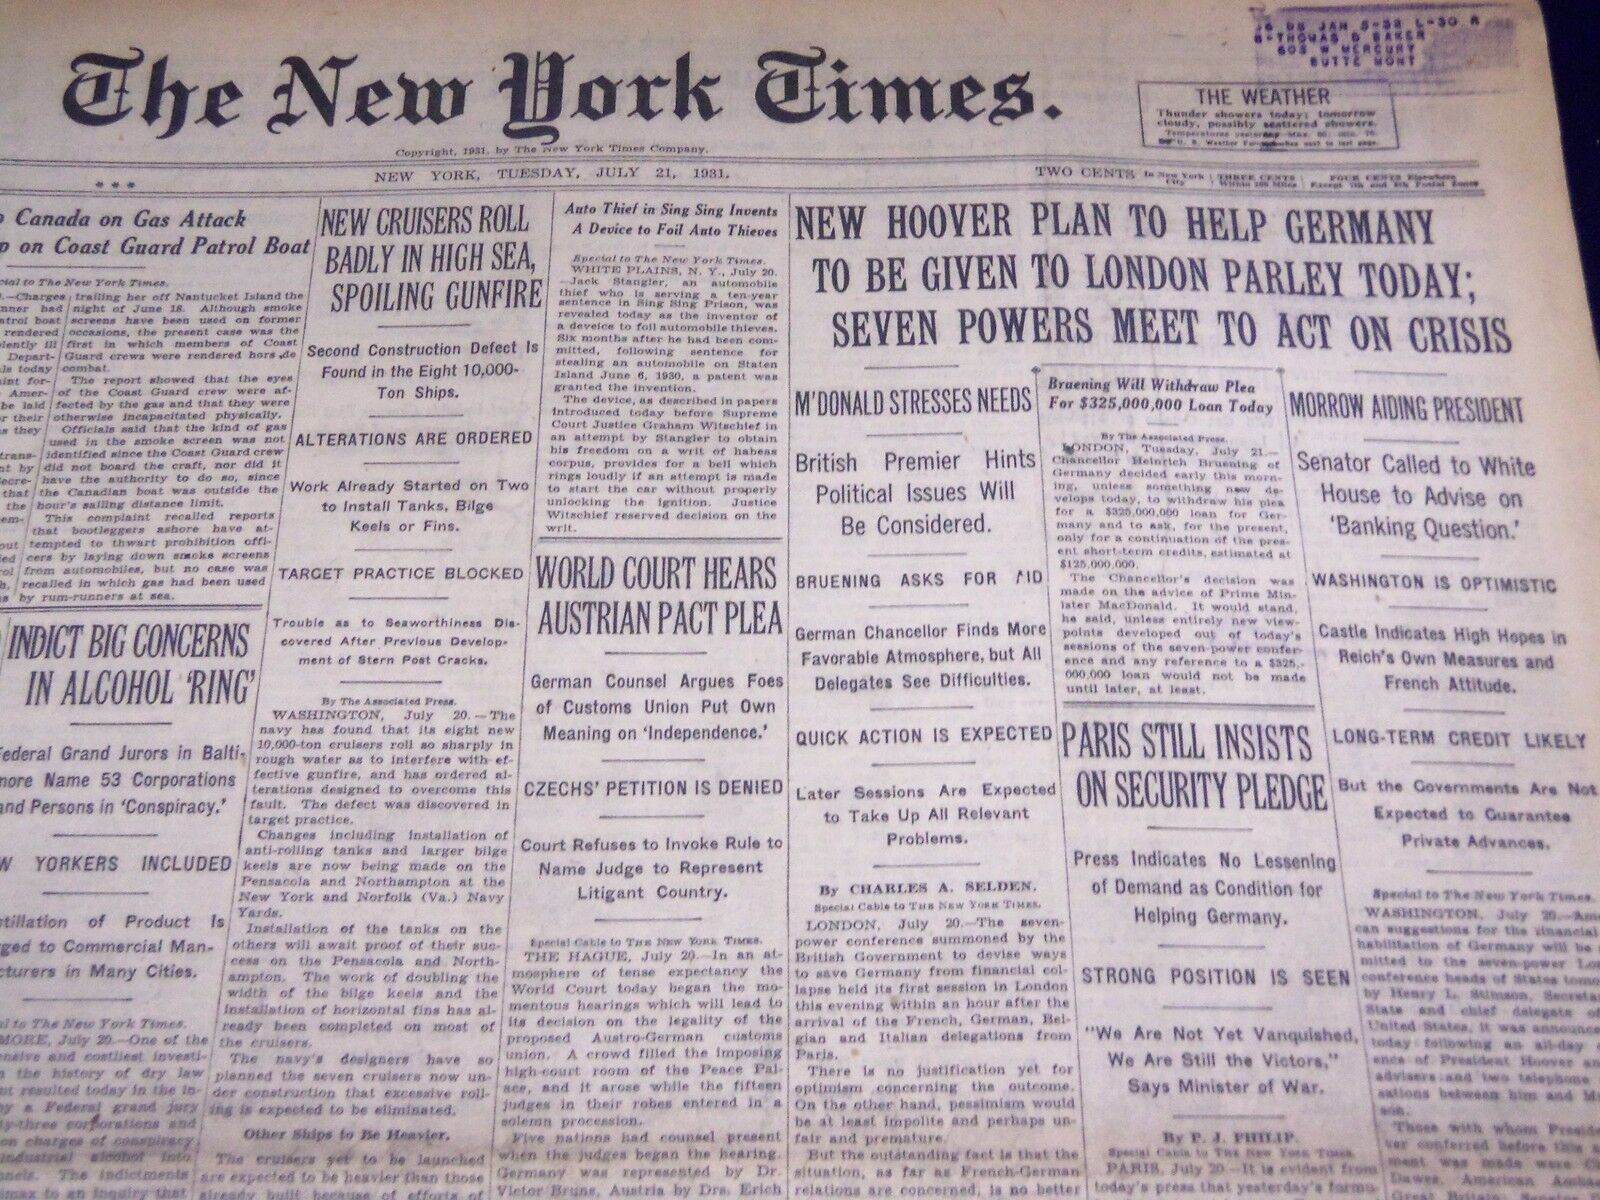 1931 JULY 21 NEW YORK TIMES - NEW HOOVER PLAN TO HELP GERMANY - NT 2214